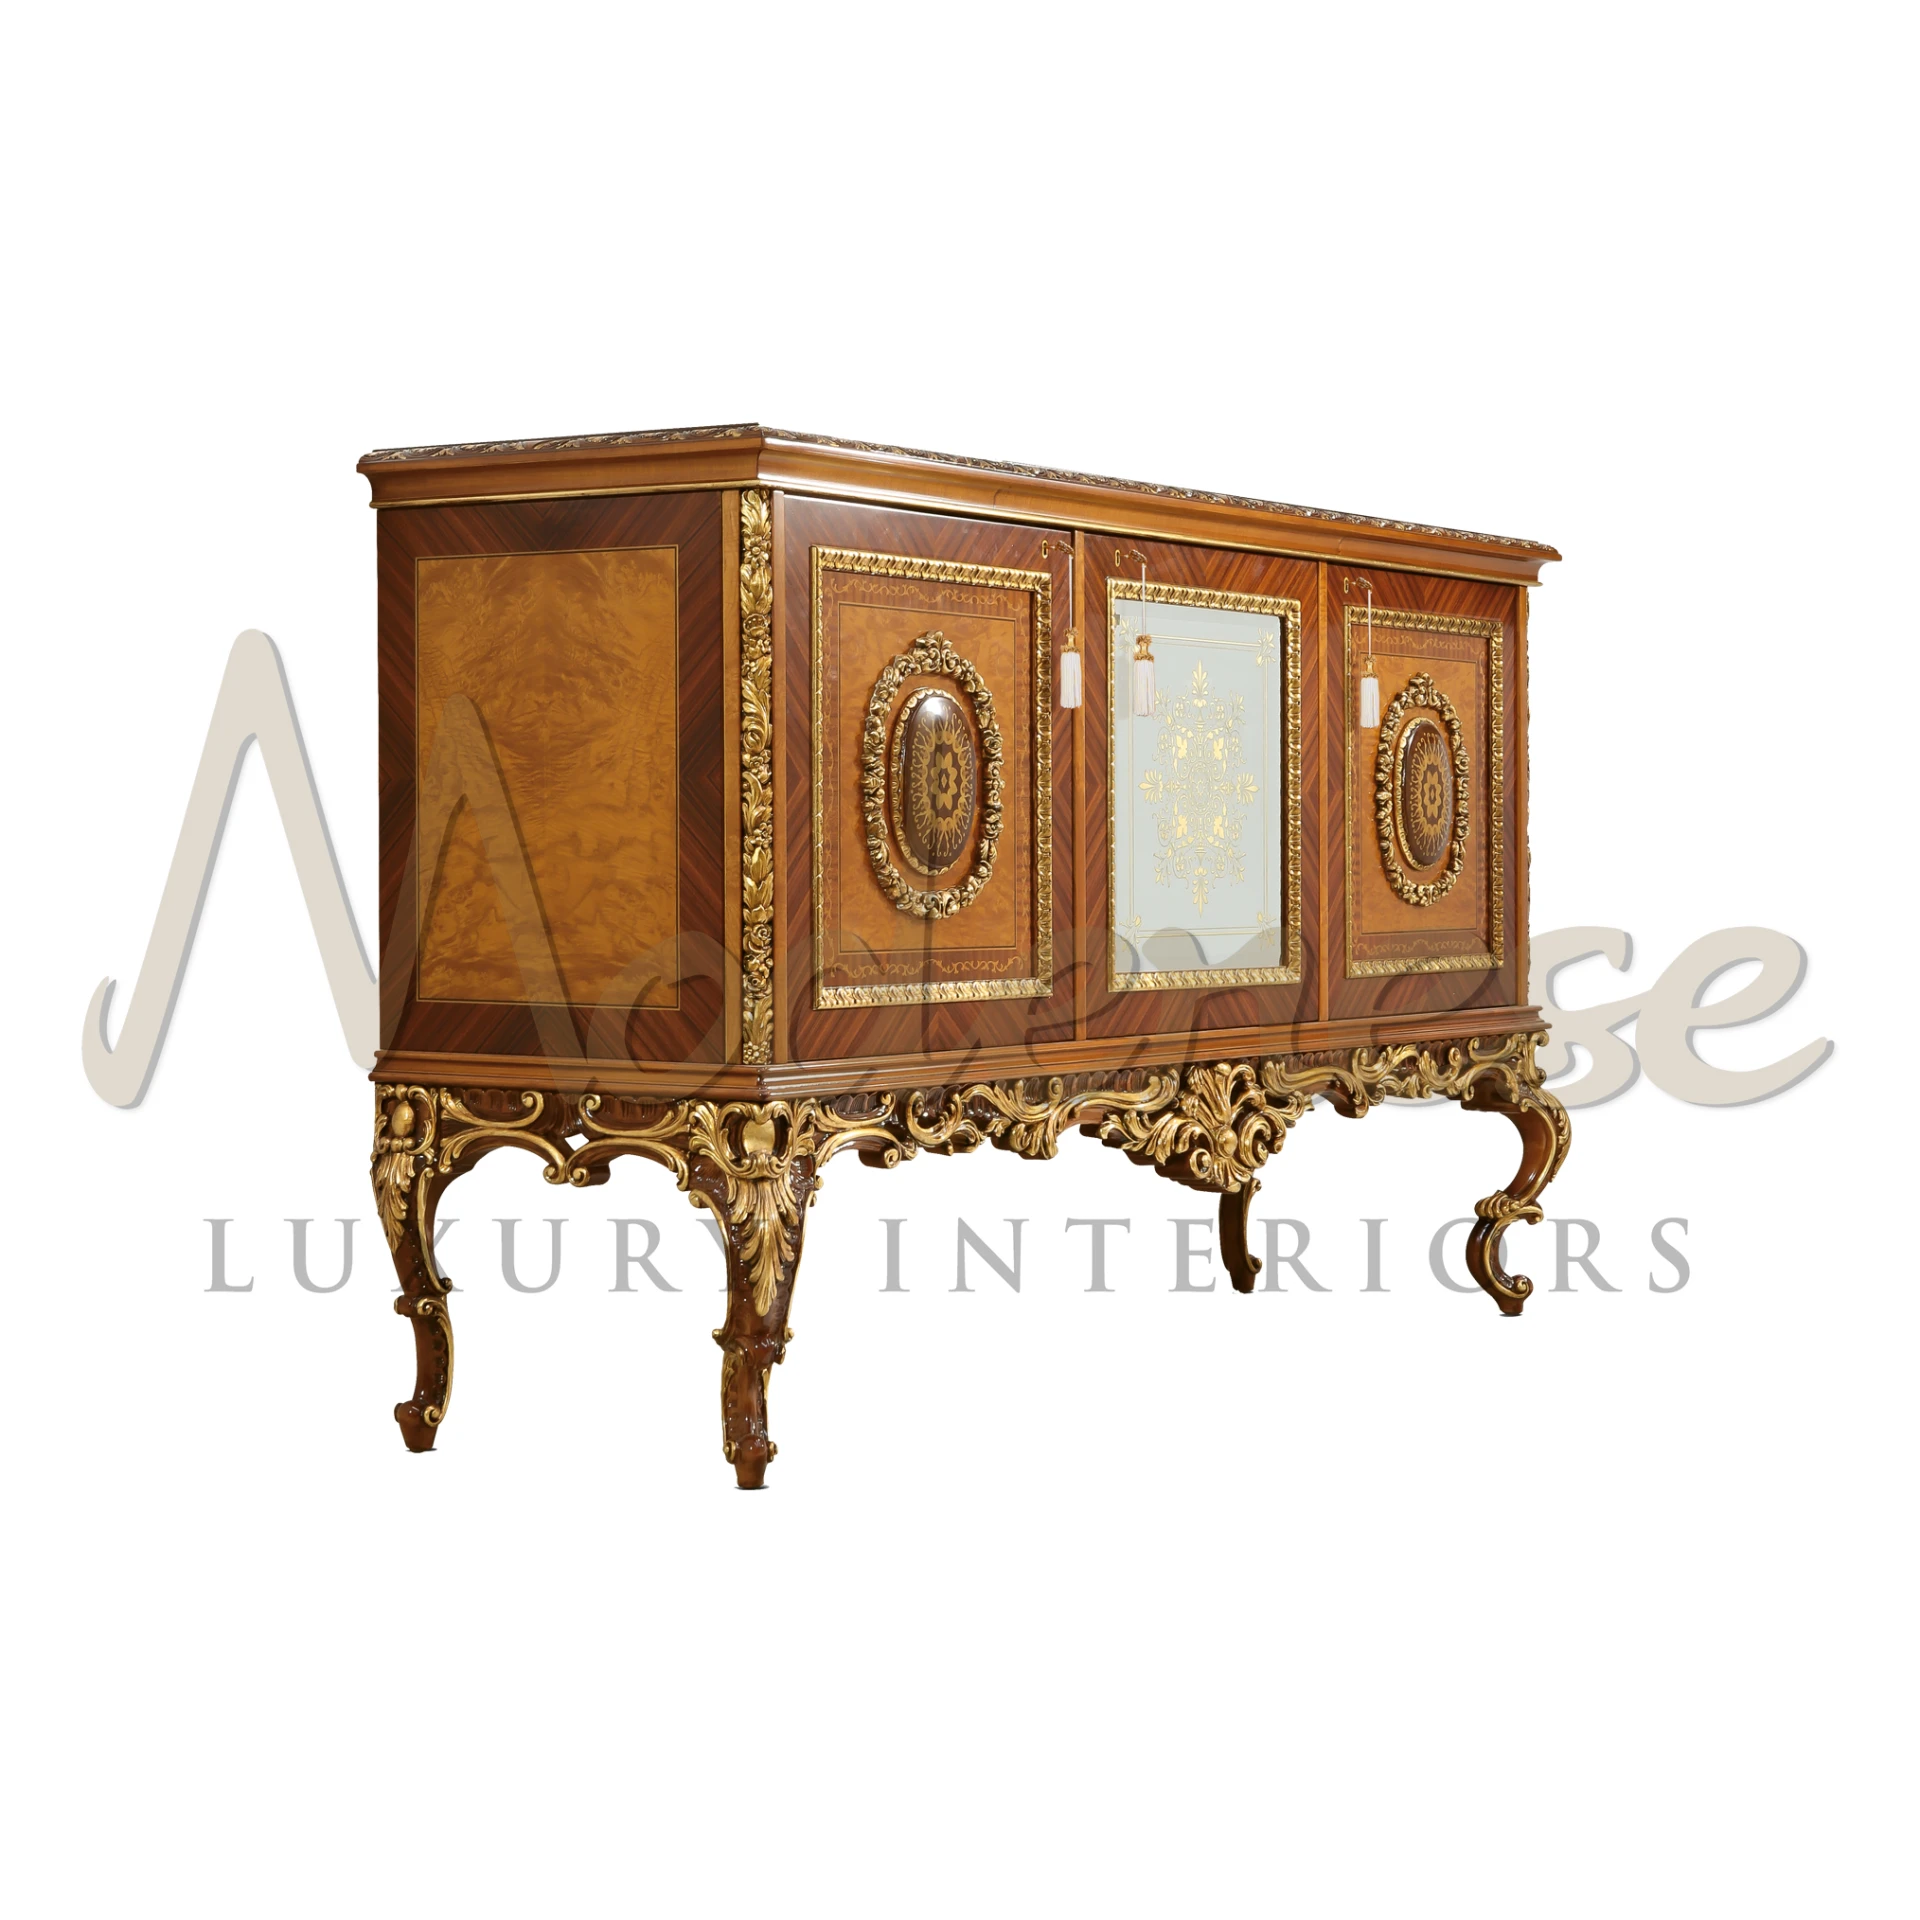 Side view of Baroque style three doors sideboard with golden complex carvings on its corners.